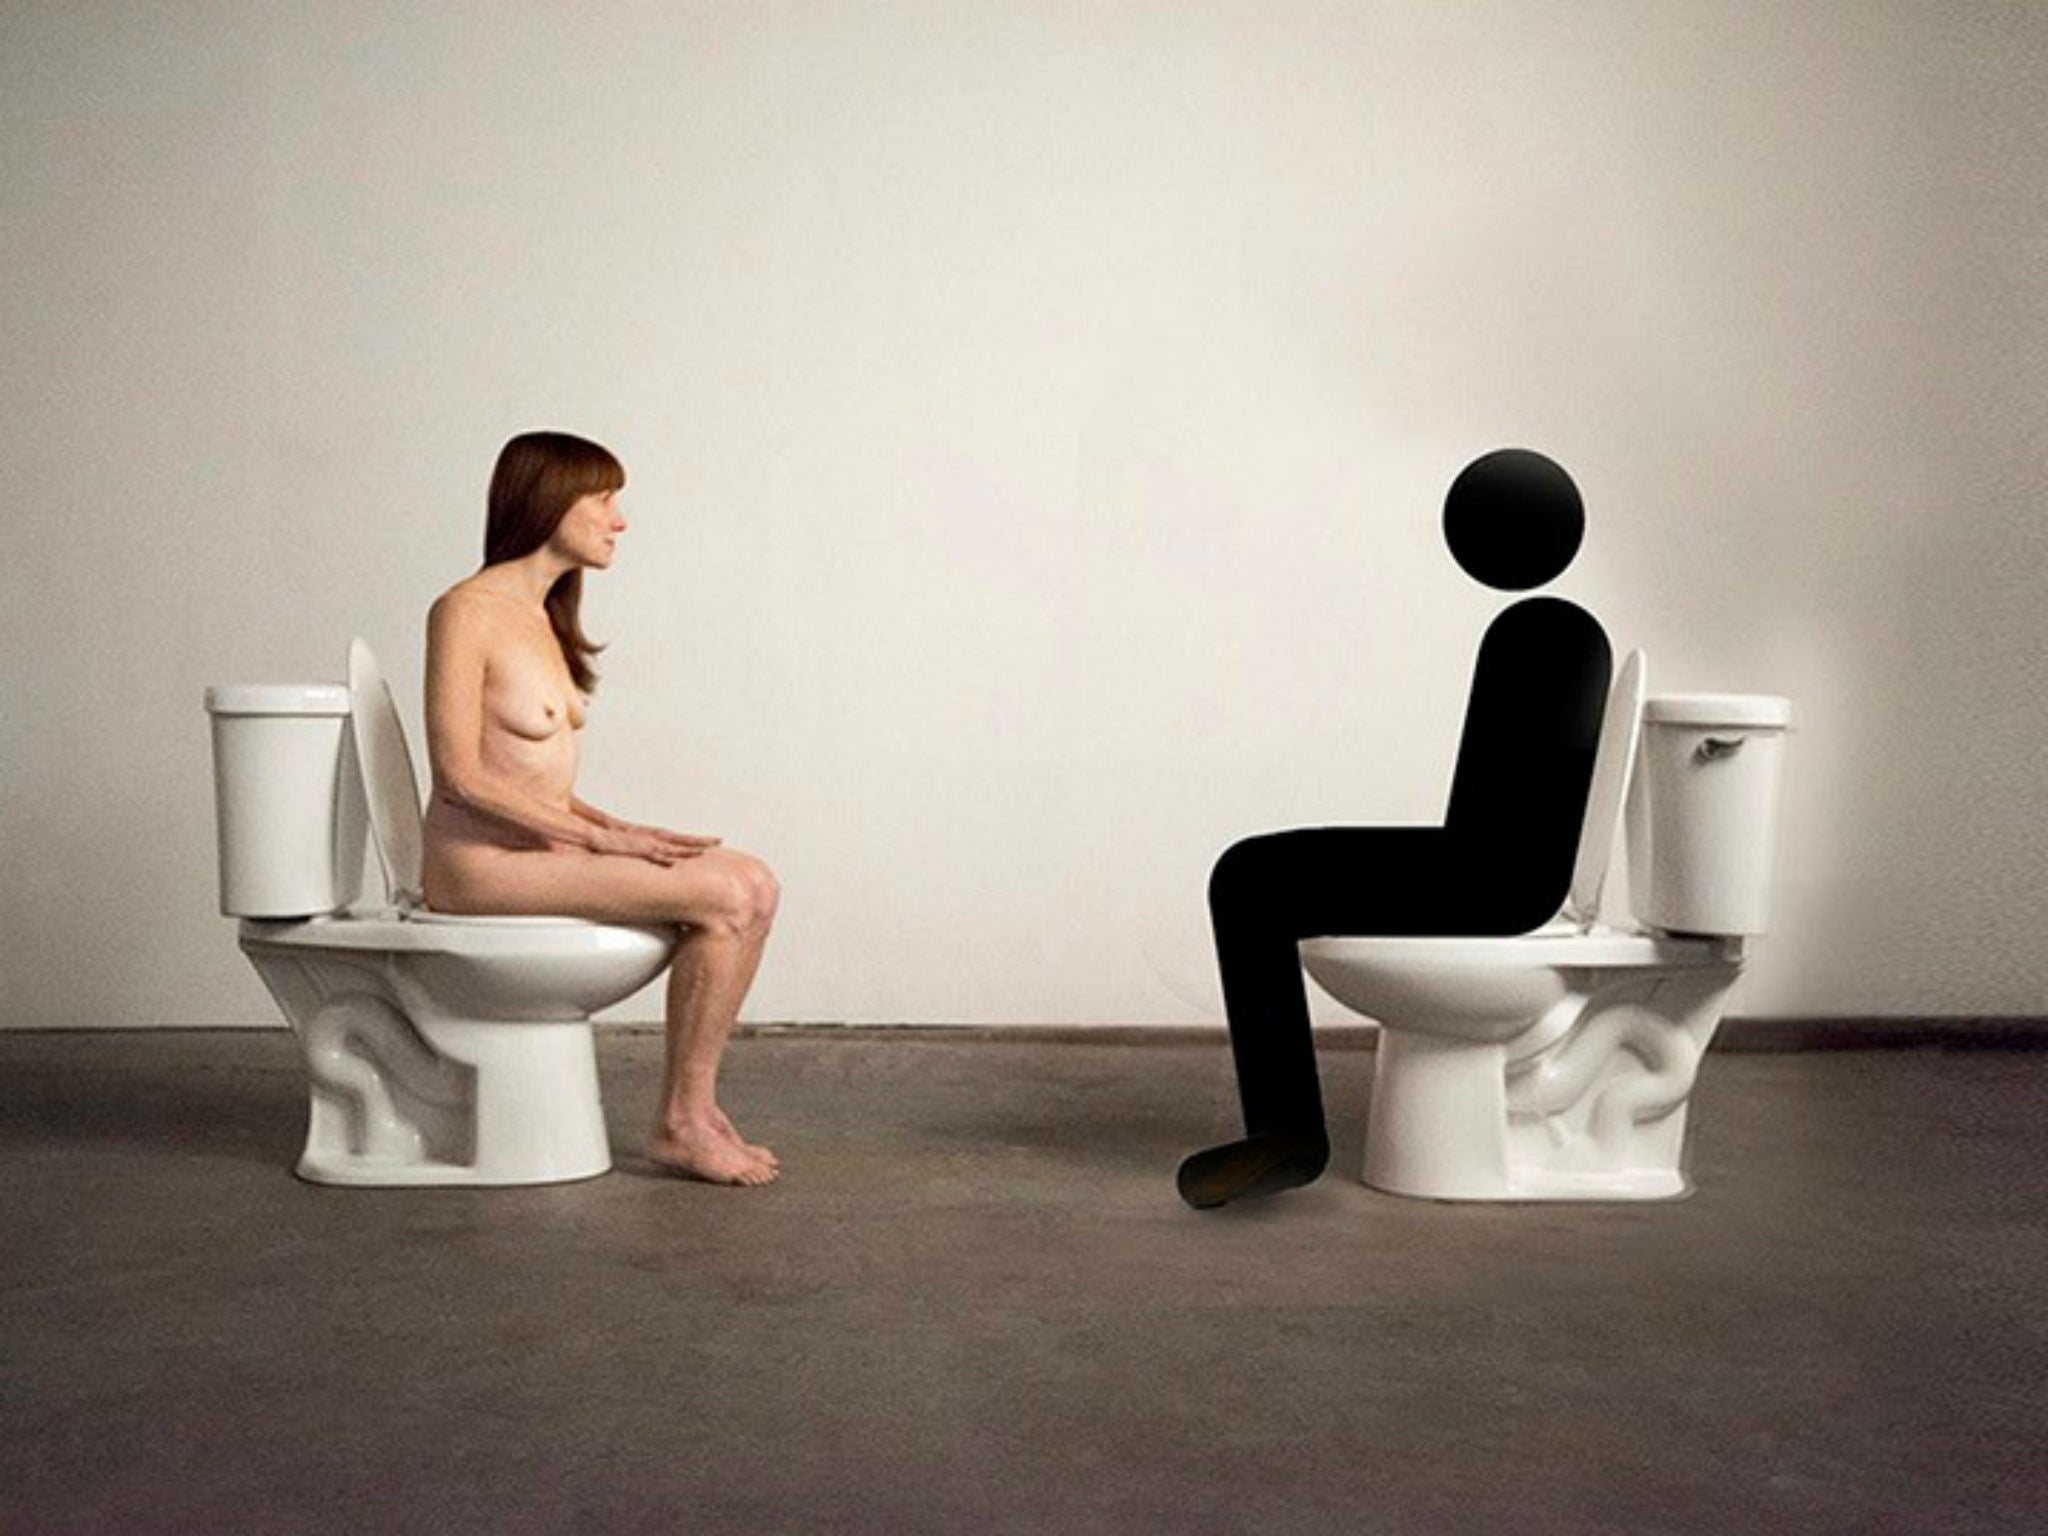 Artist to sit naked on a toilet for two days to protest bulls**t art world The Independent The Independent